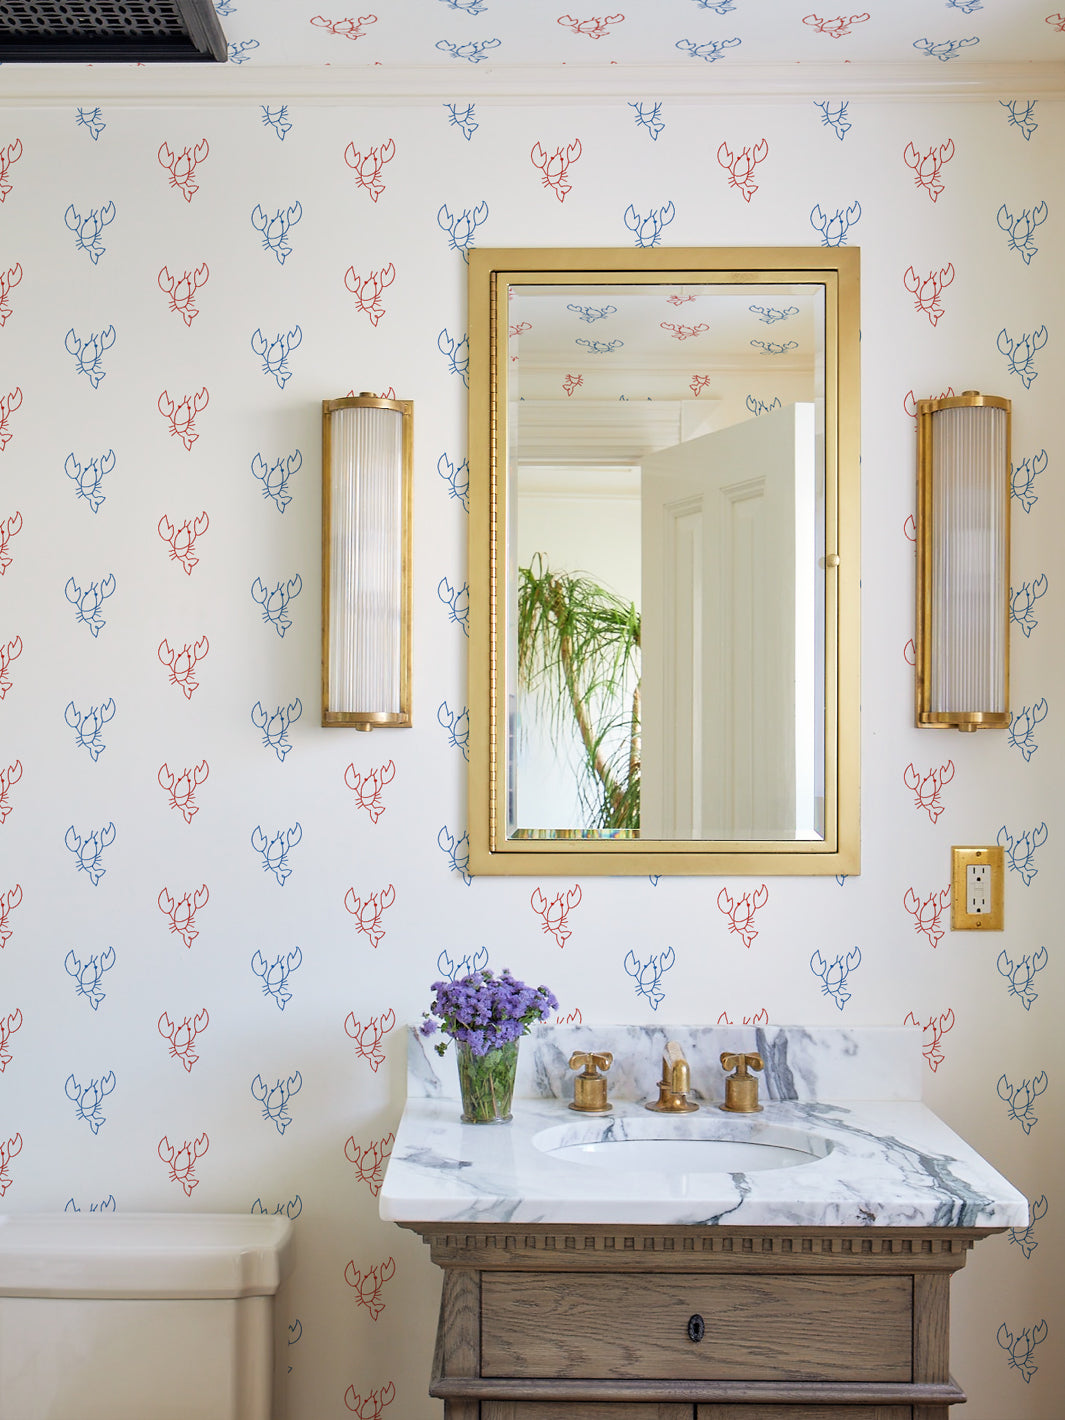 'Lobsters' Wallpaper by Lingua Franca - Blue + Red